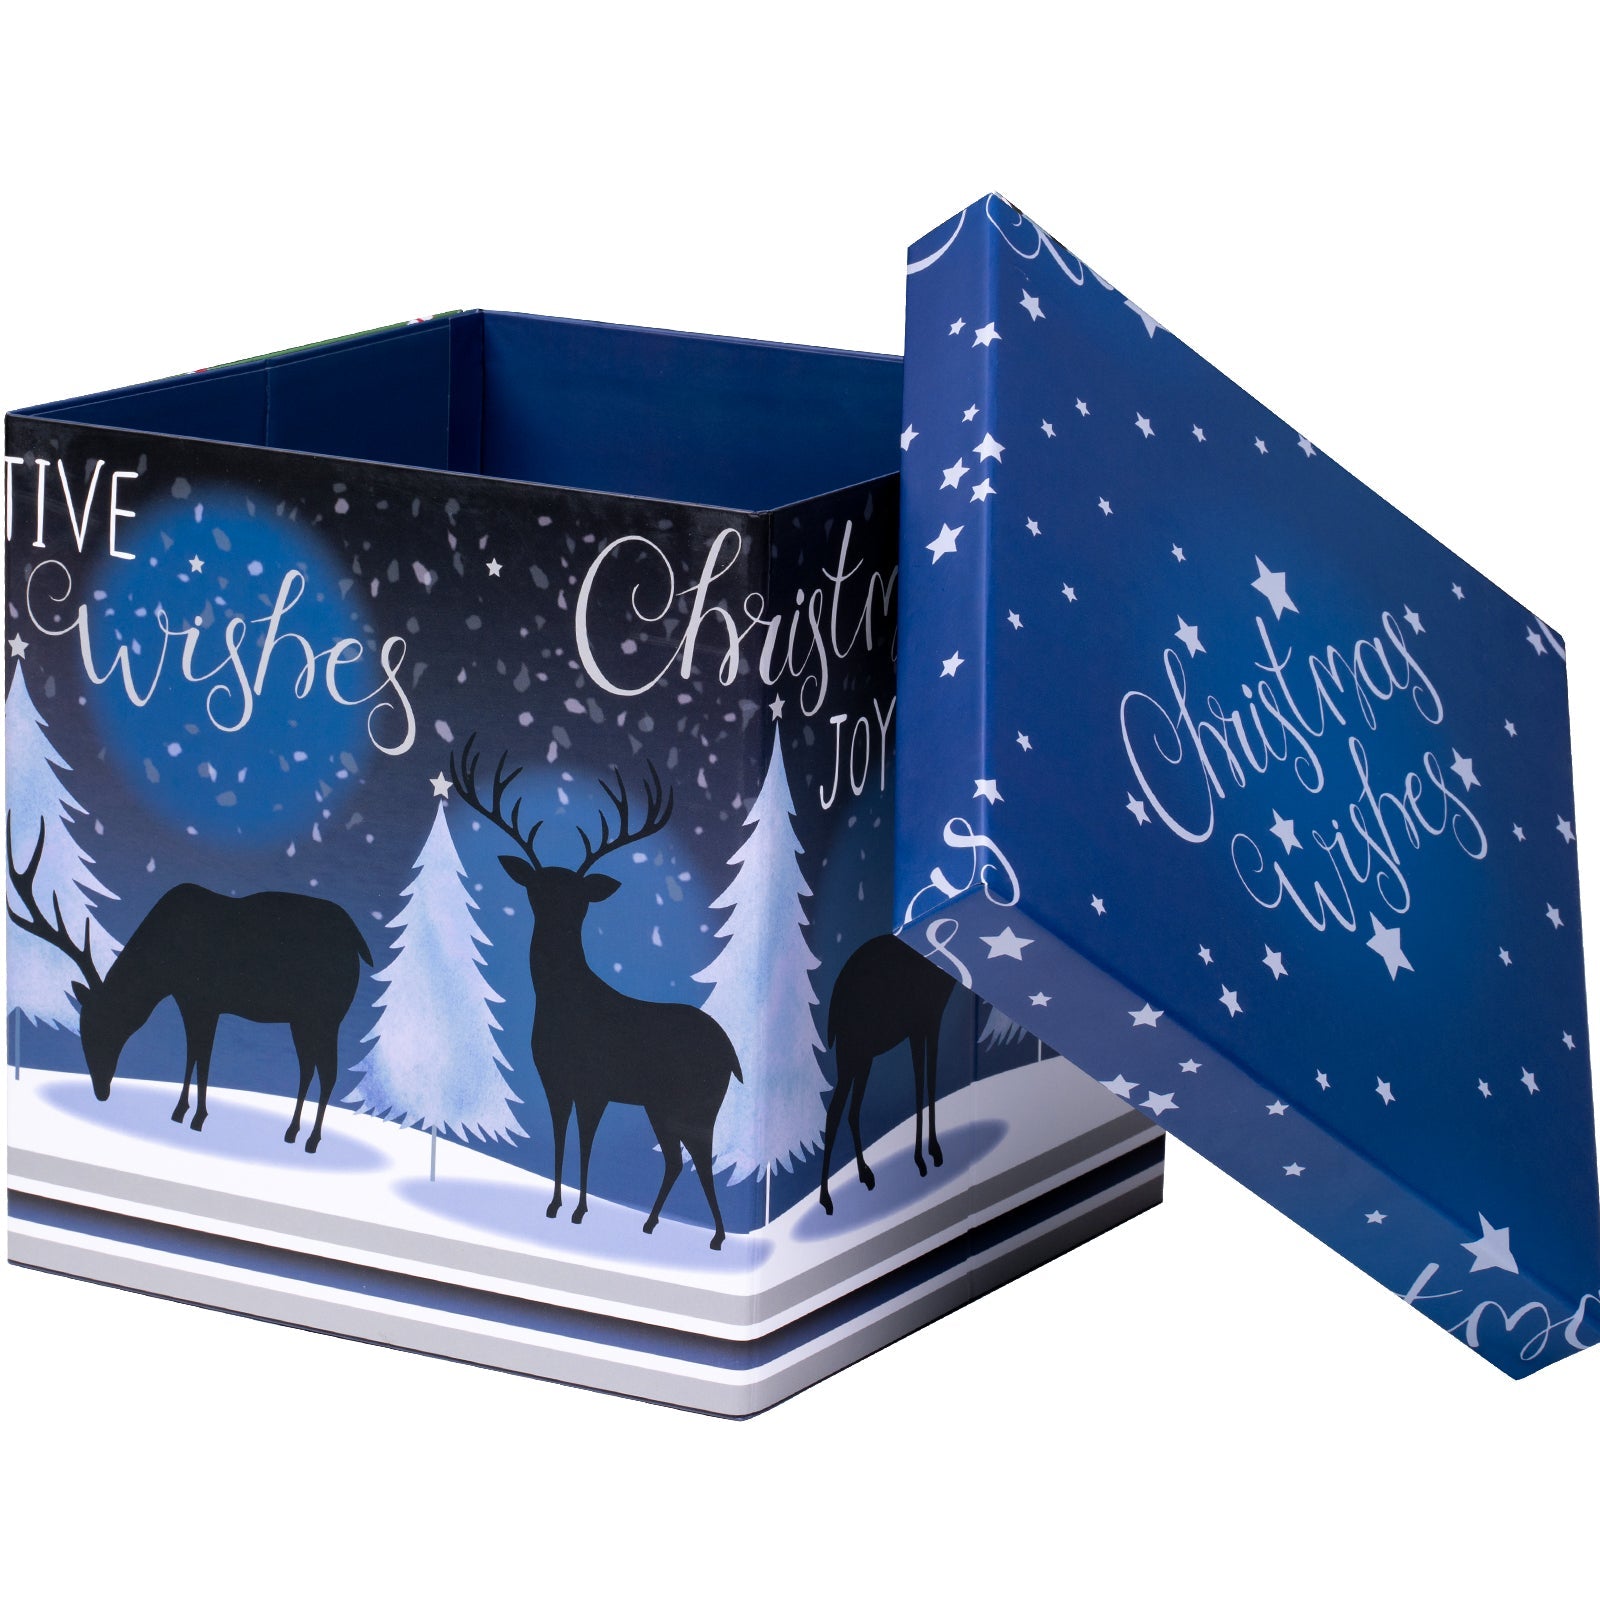 9 inch Square Christmas Gift Box with Lid - Night Reindeer